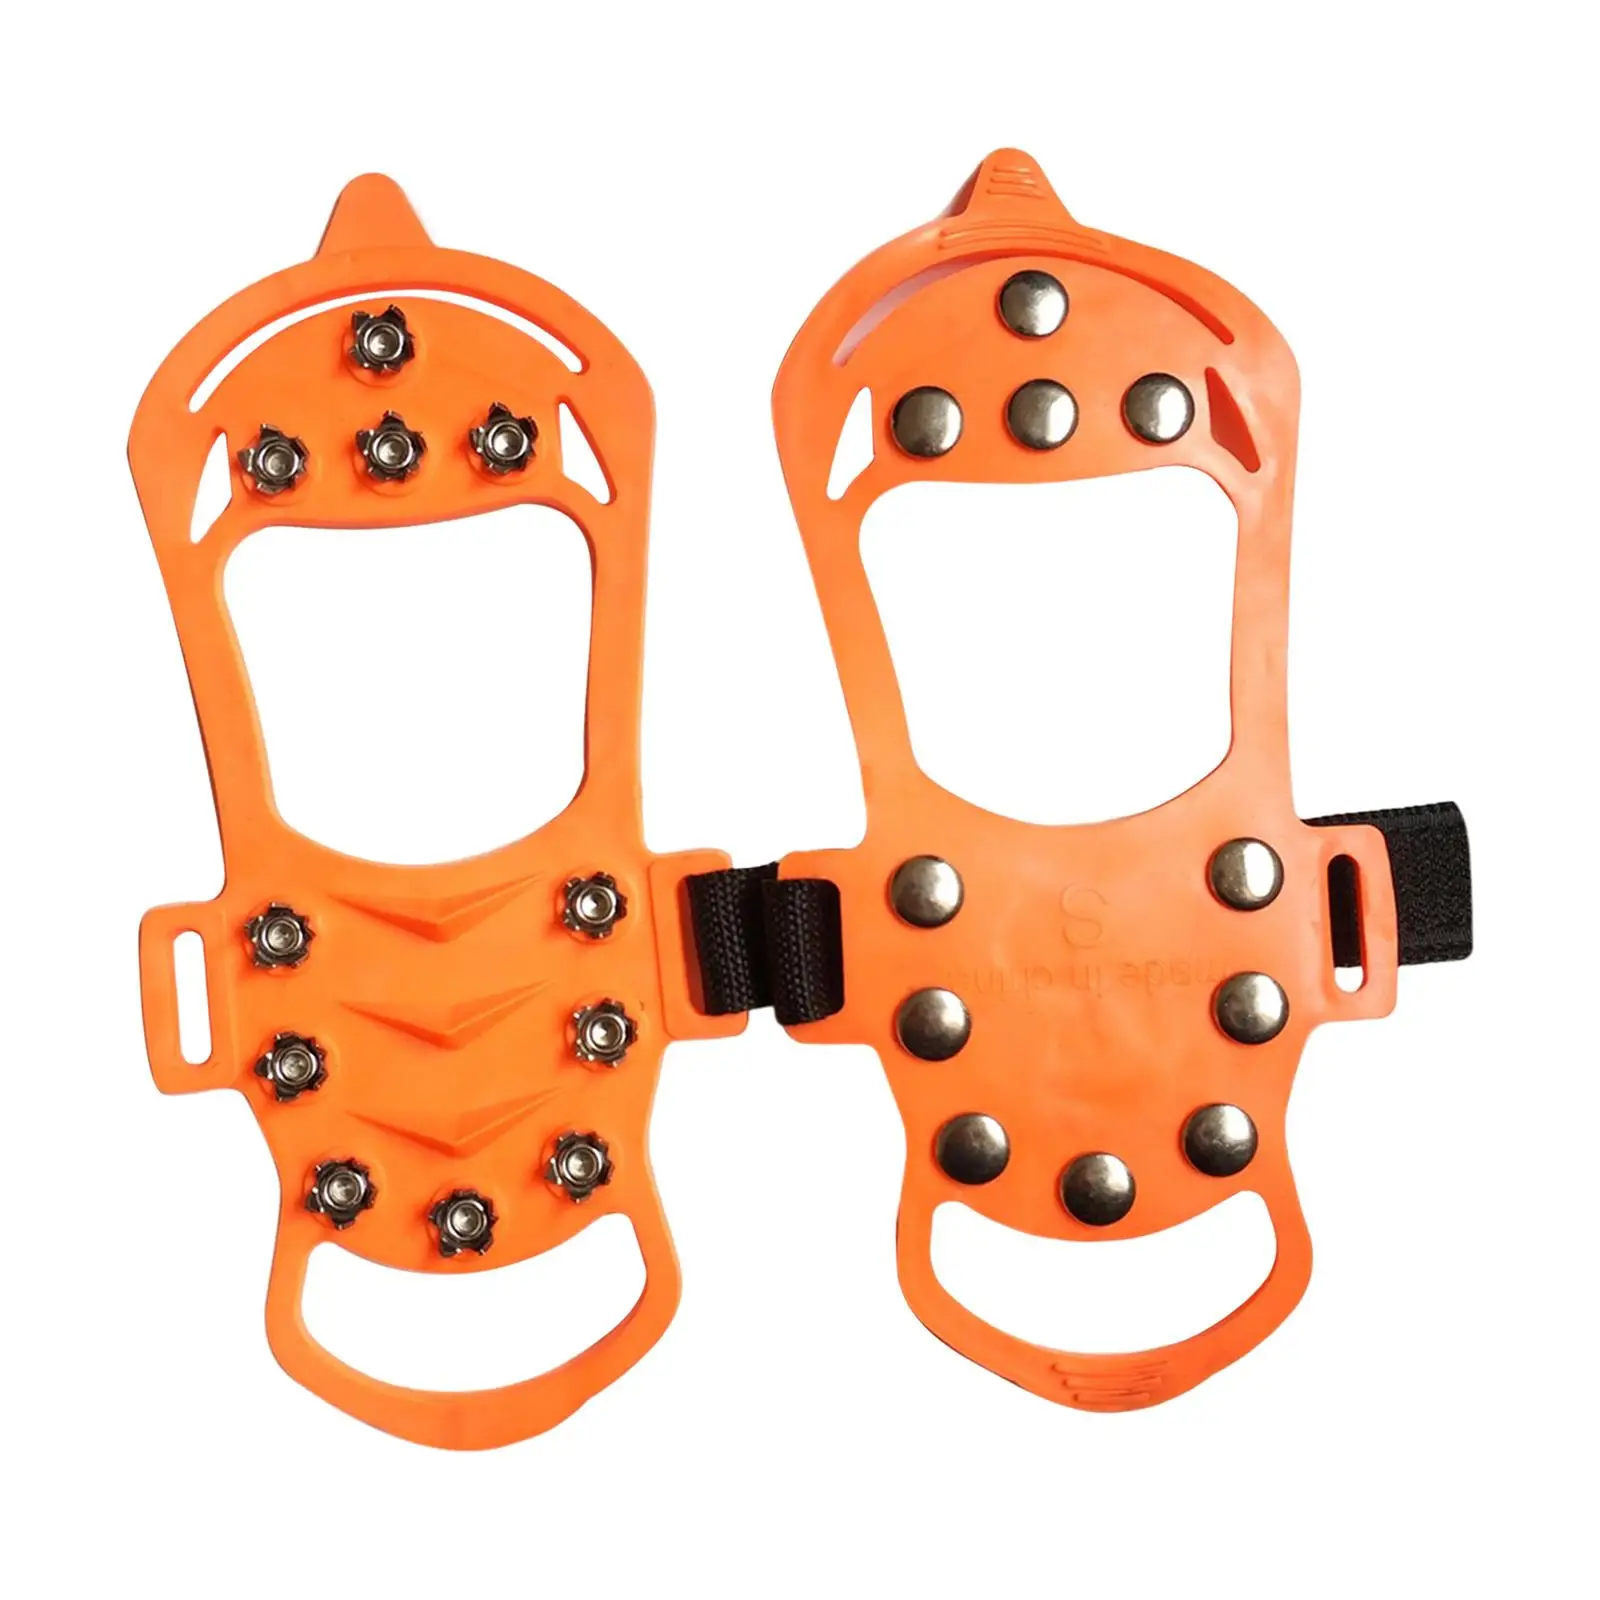 Non Slip 11 Spikes Crampons, Shoe Cover Lightweight Ice Snow Grips for Snow